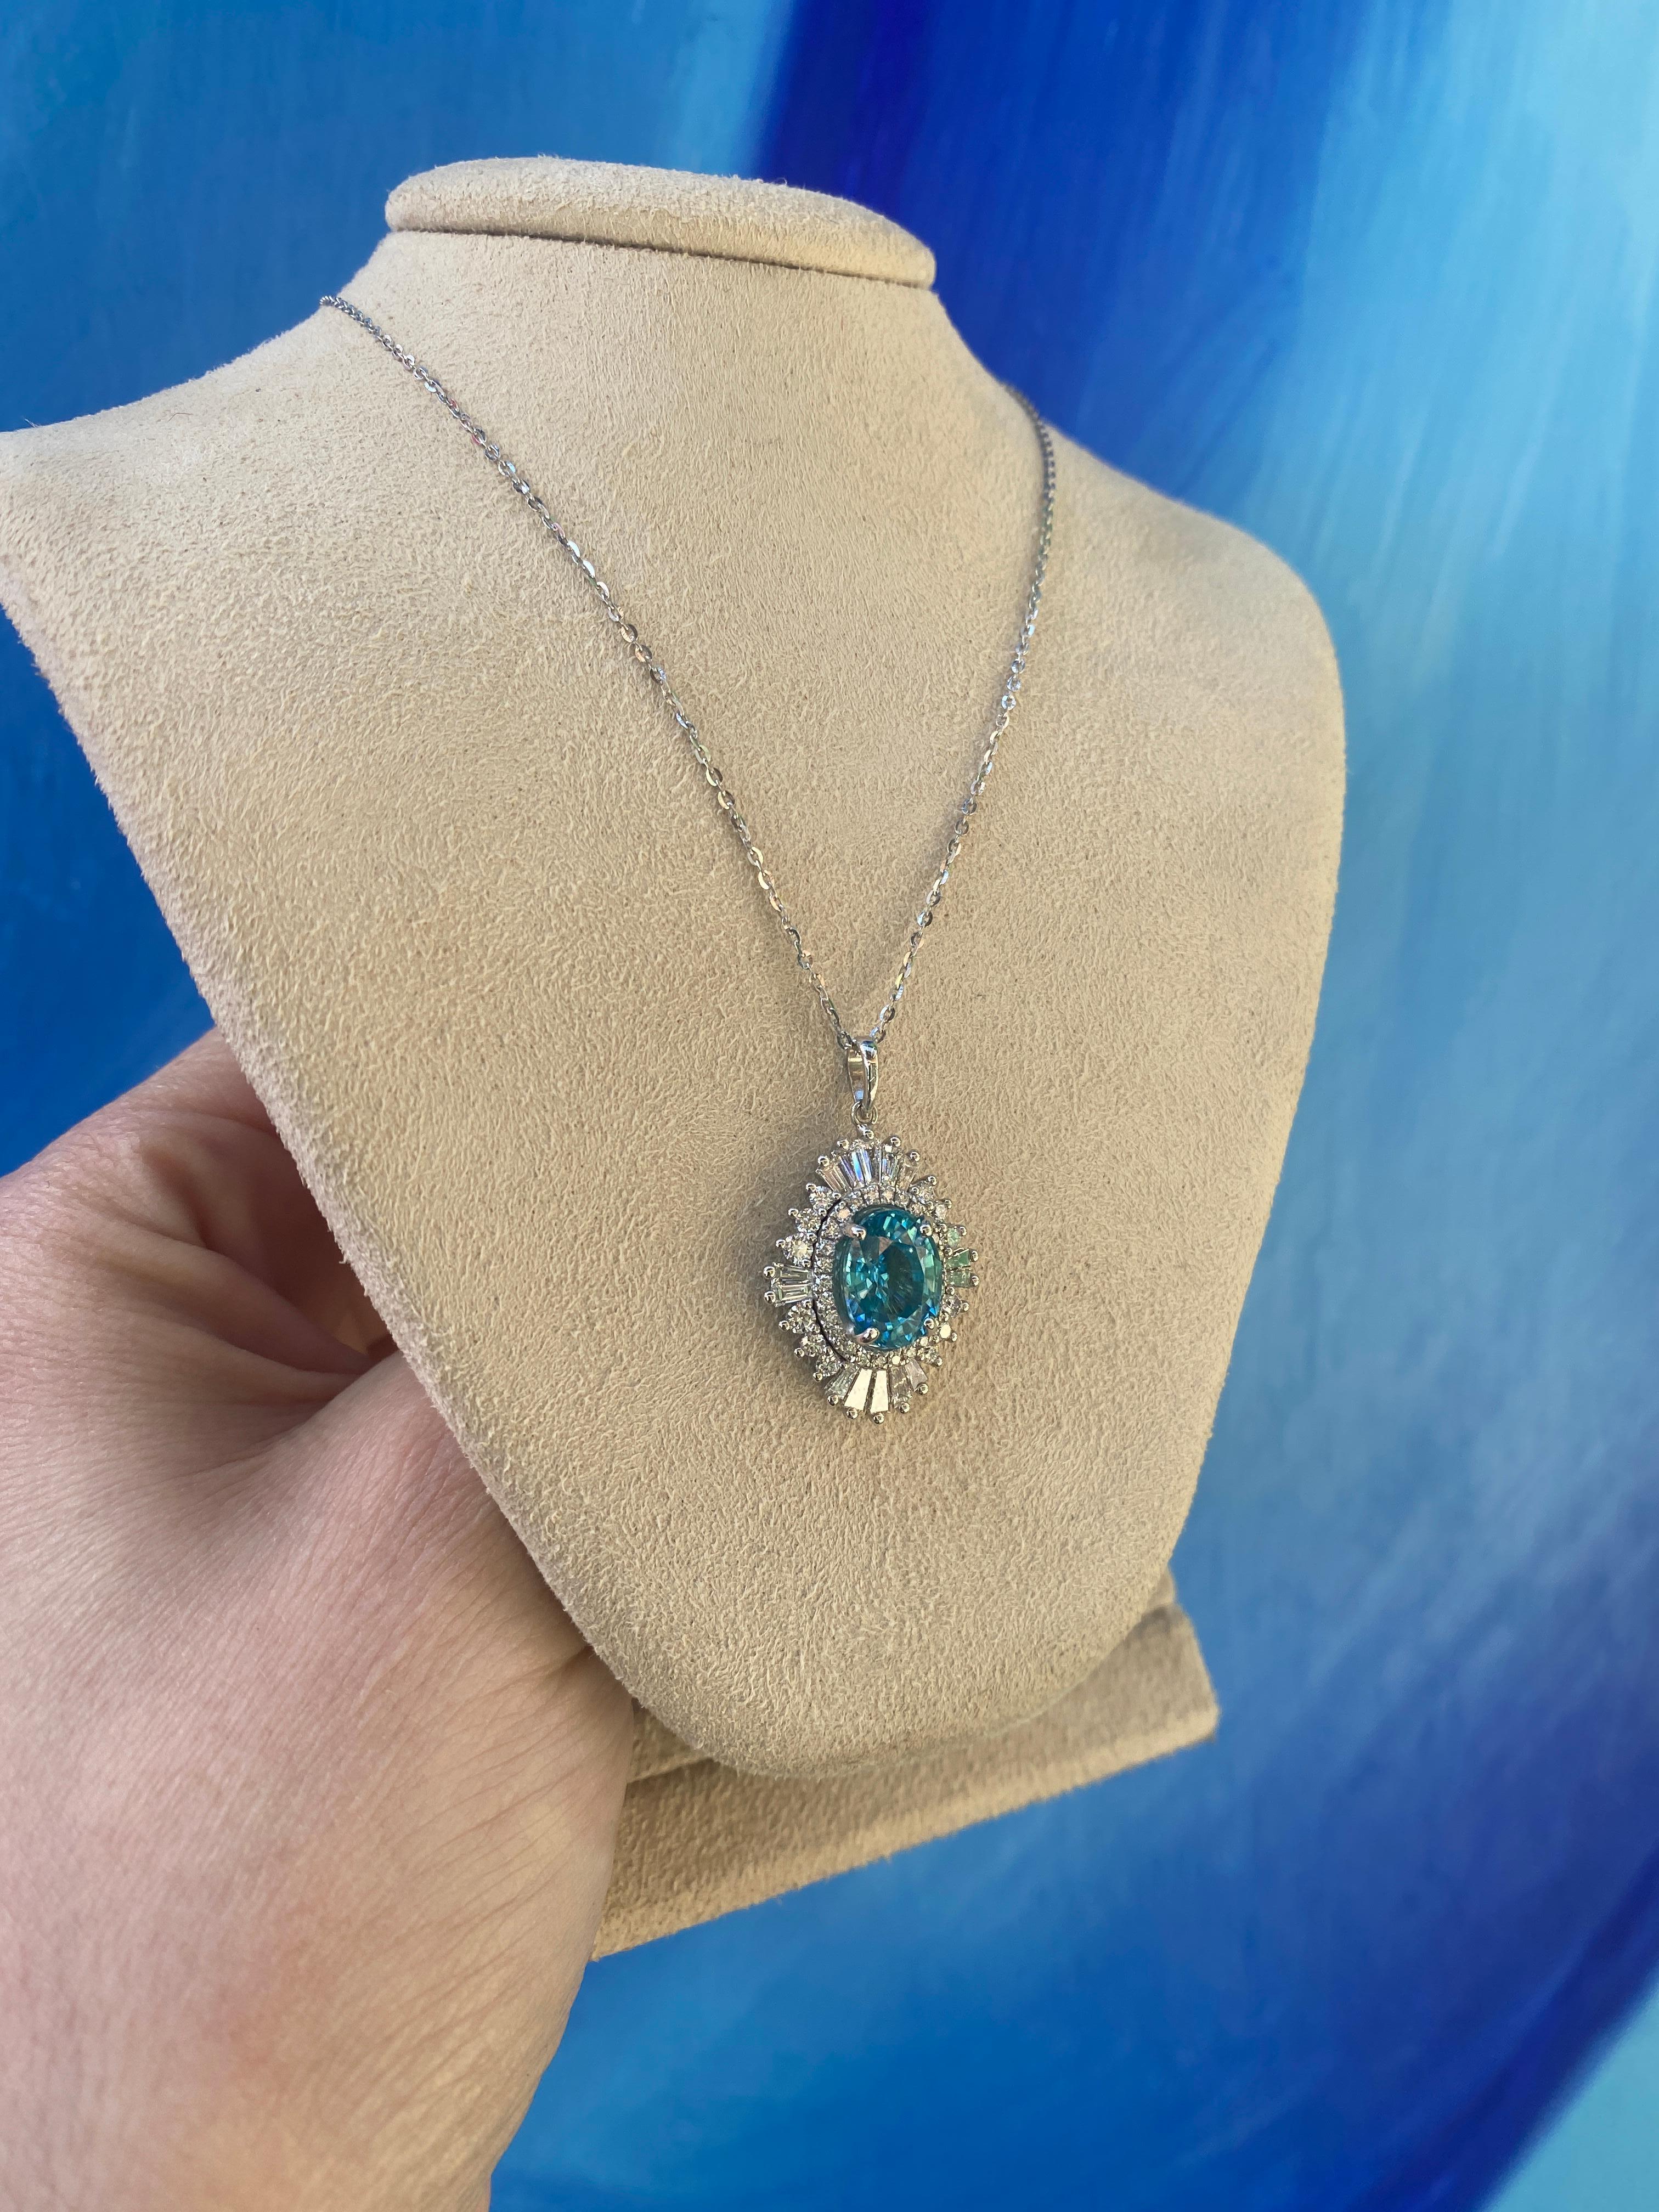 3.98 Carat Oval Cut Blue Zircon Pendant Necklace with 0.92ctw Diamonds, 18k Gold In New Condition For Sale In Houston, TX